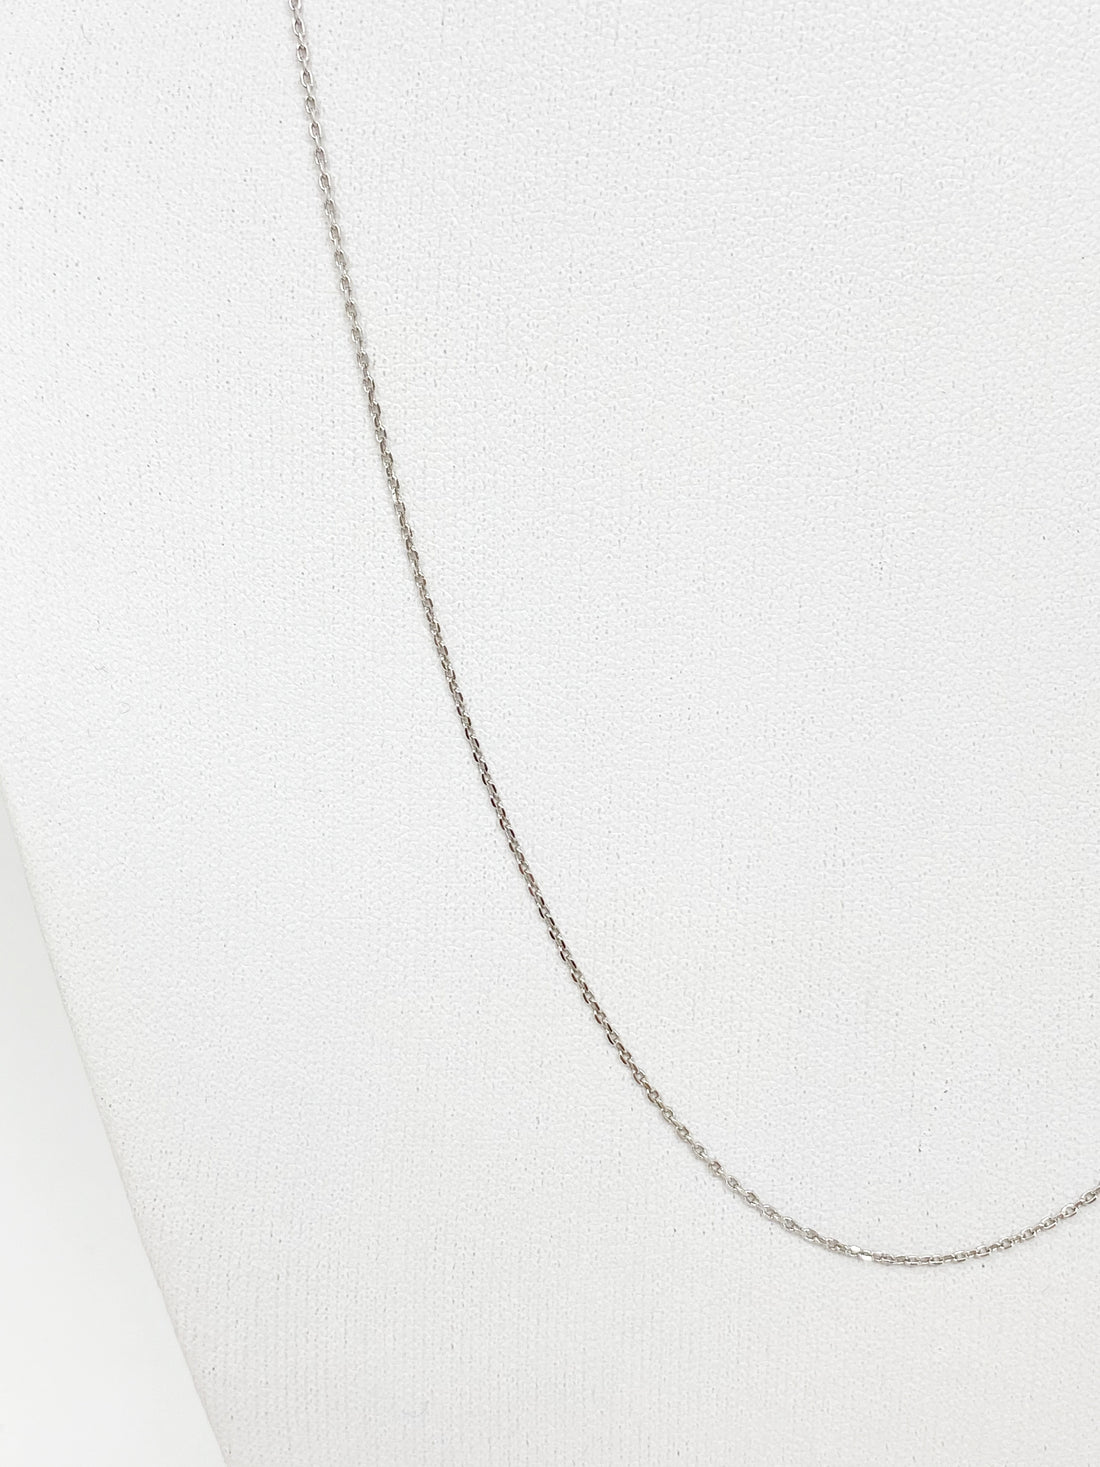 Charming 16” Delicate Chain in Silver